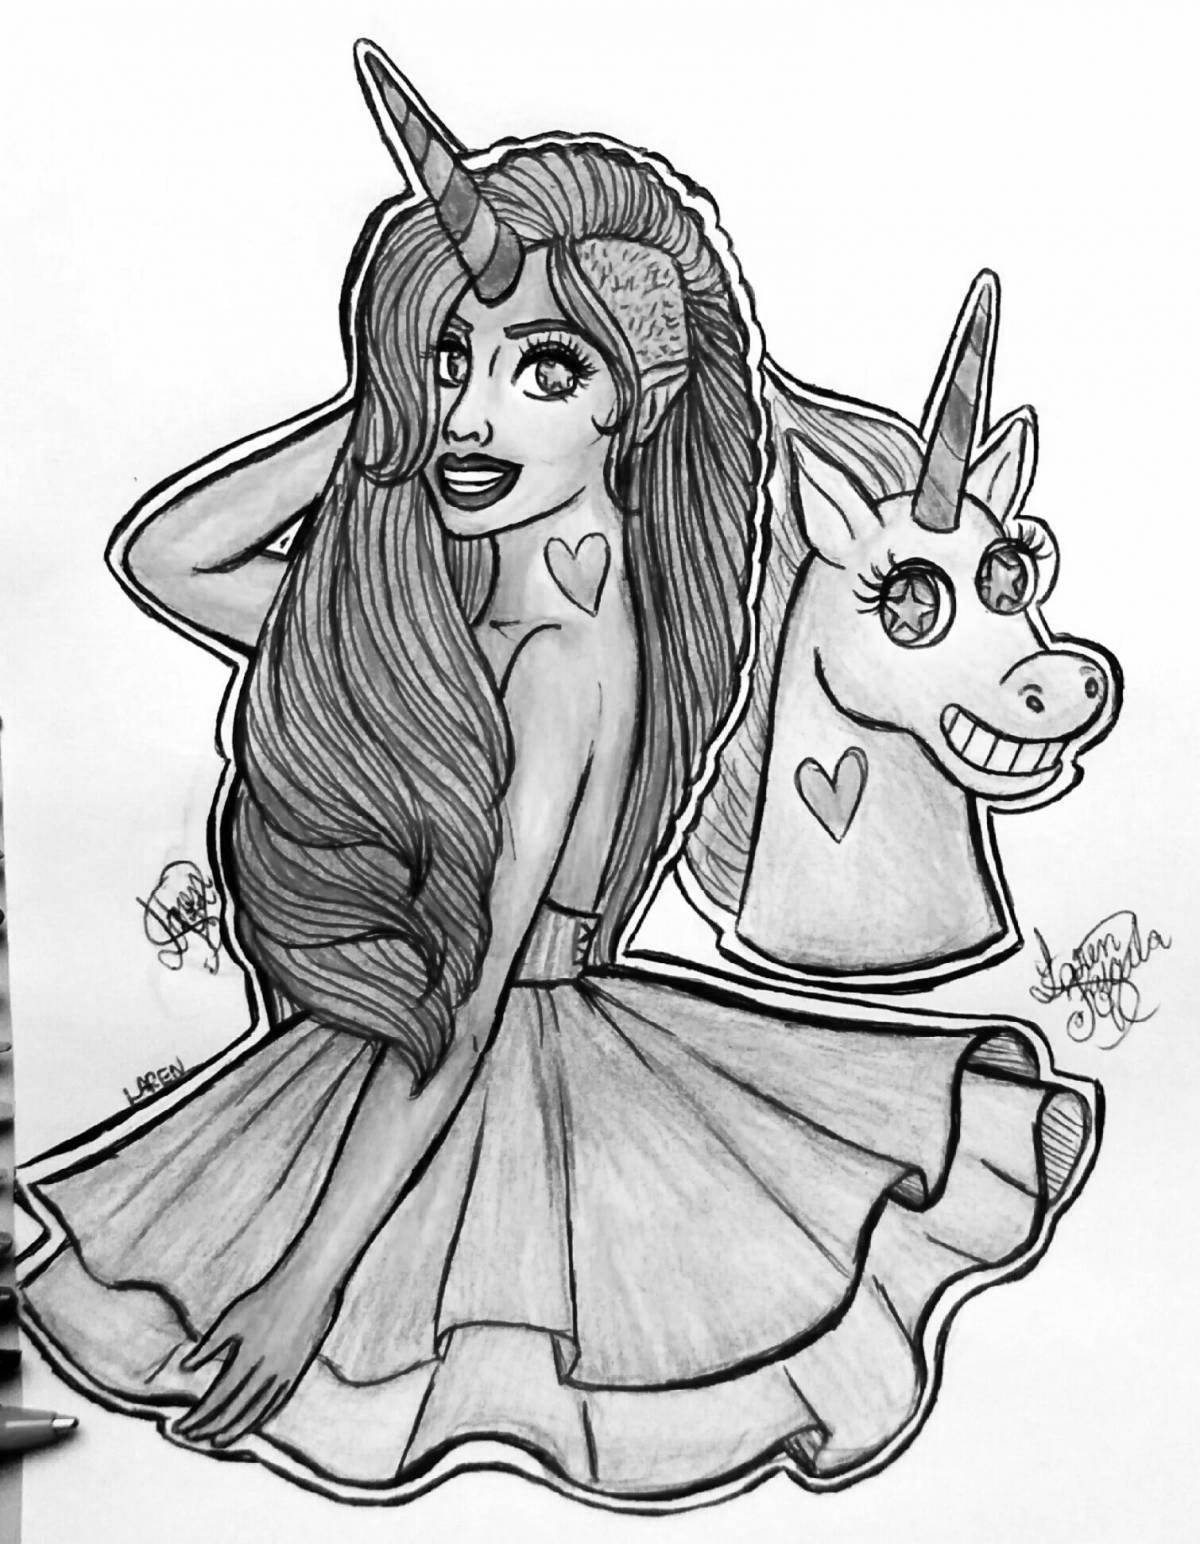 A bizarre coloring book of a girl dressed as a unicorn